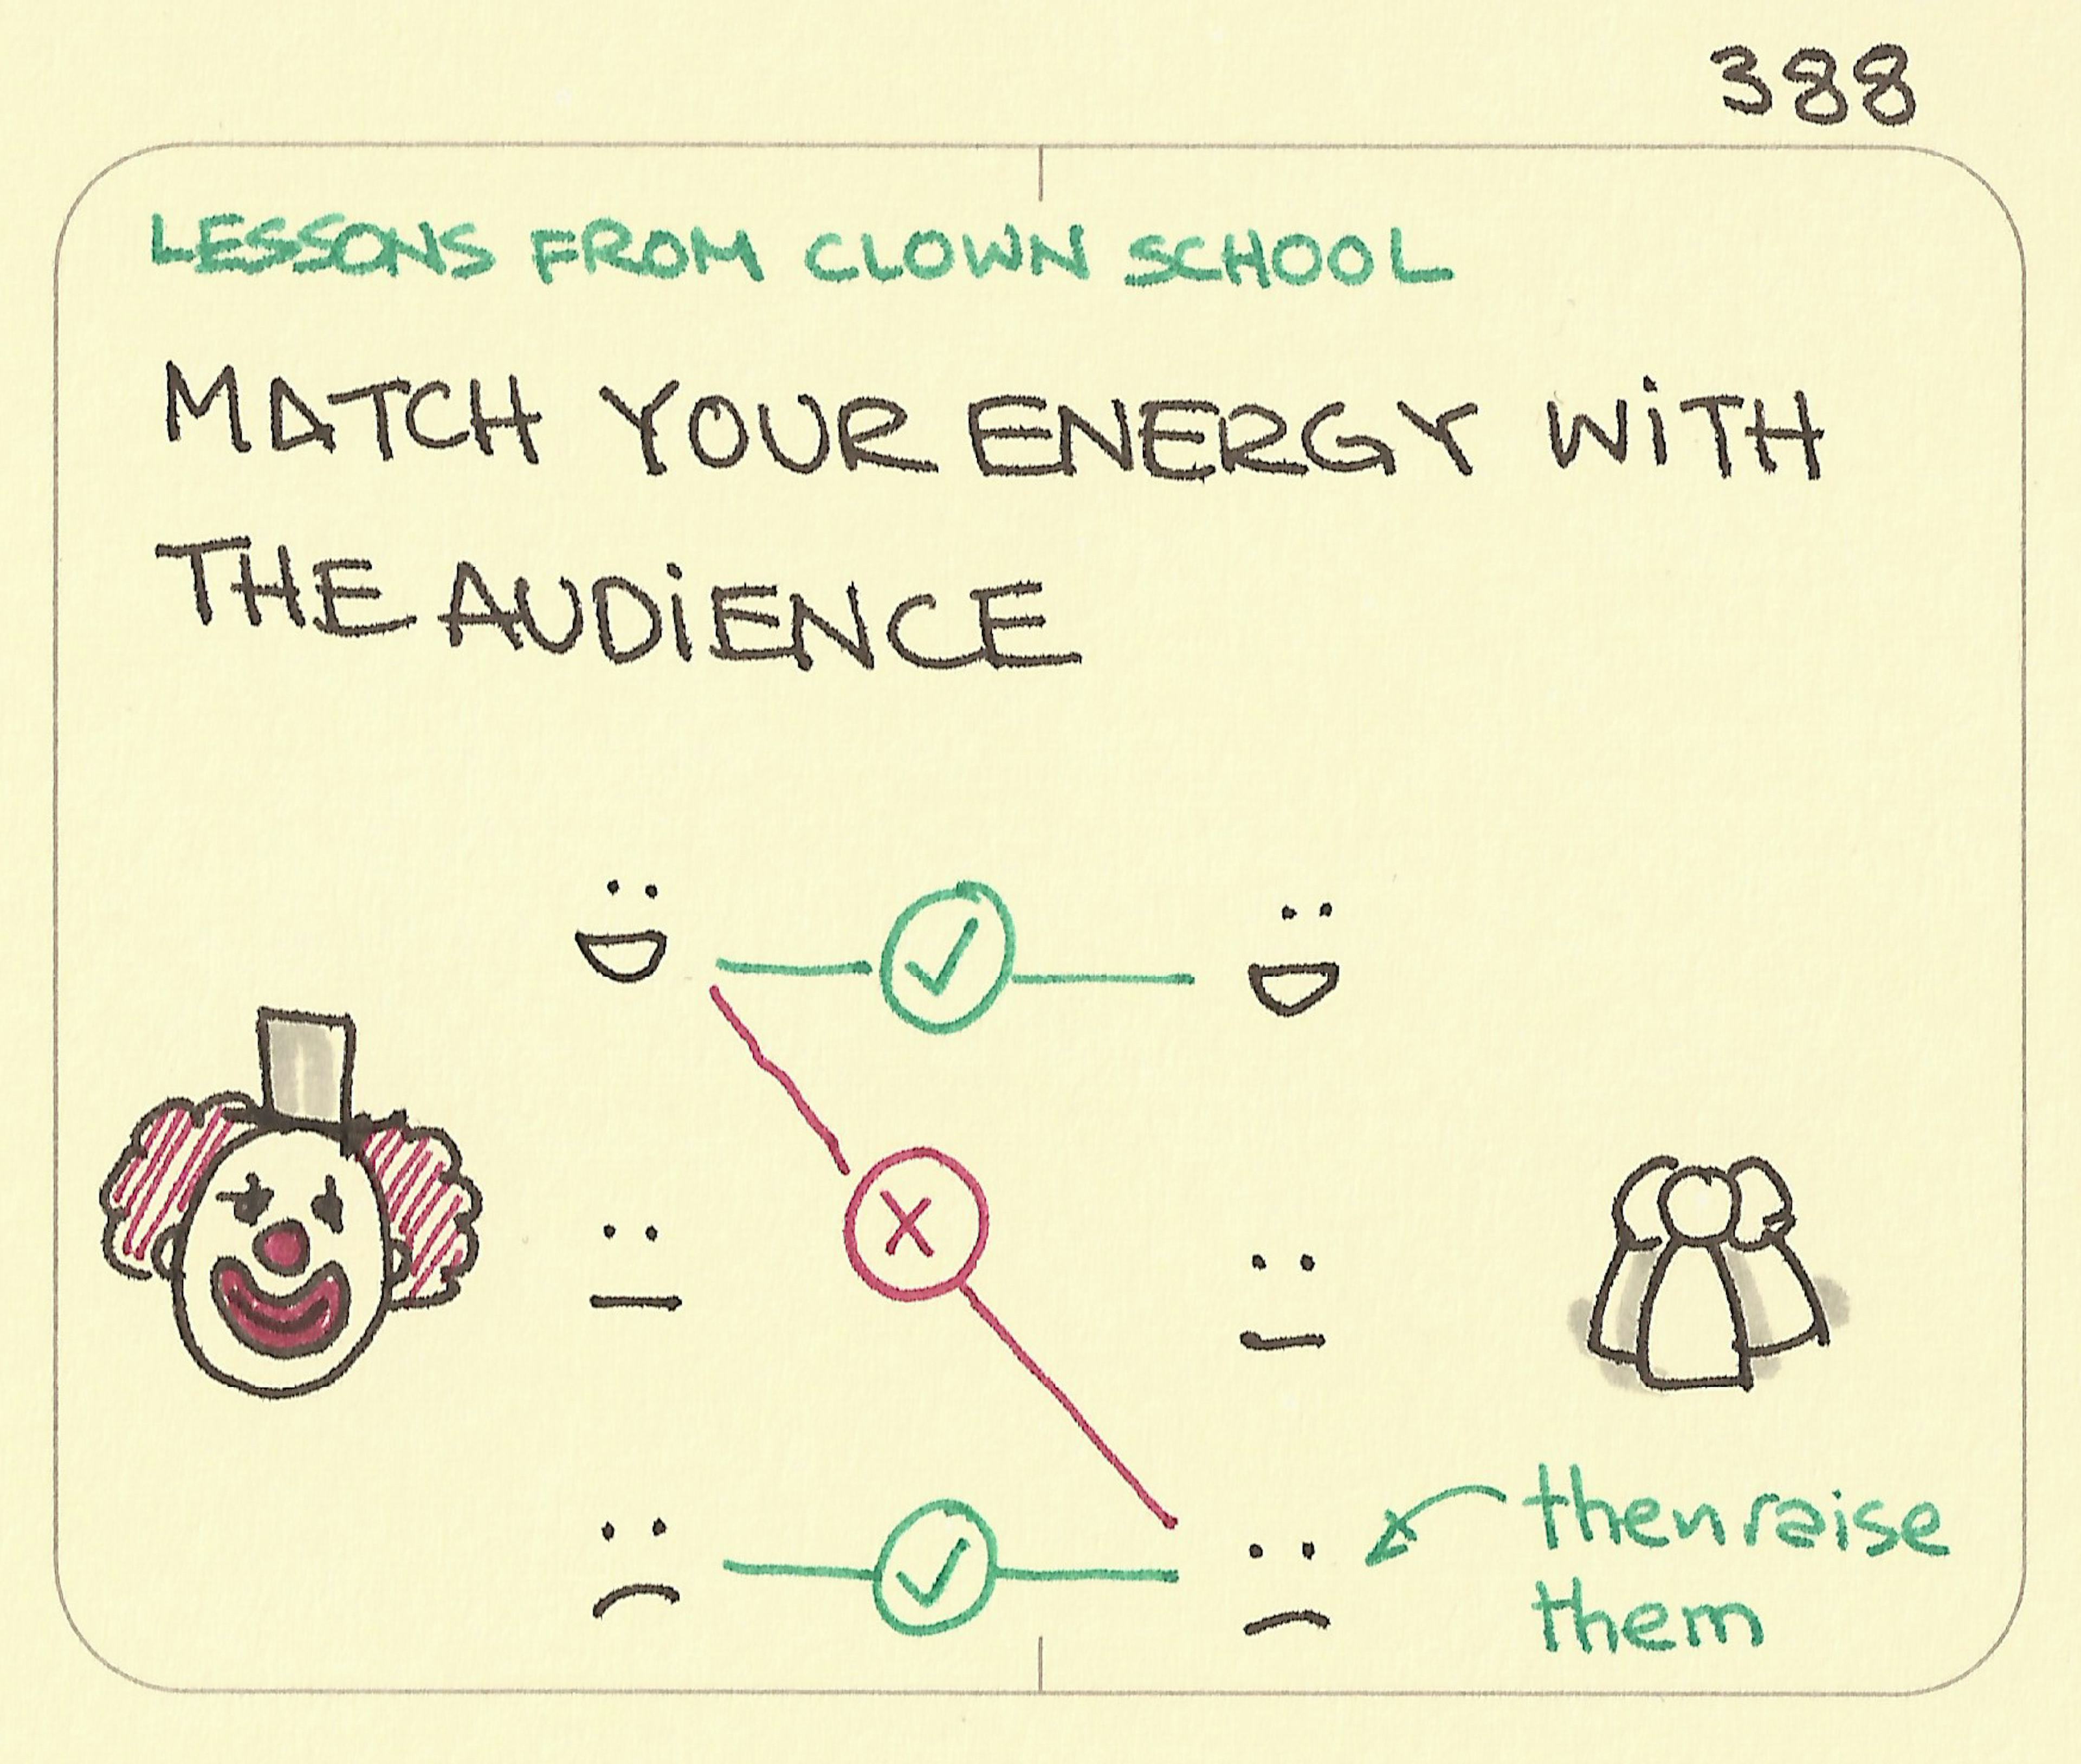 Match your energy with the audience - Sketchplanations